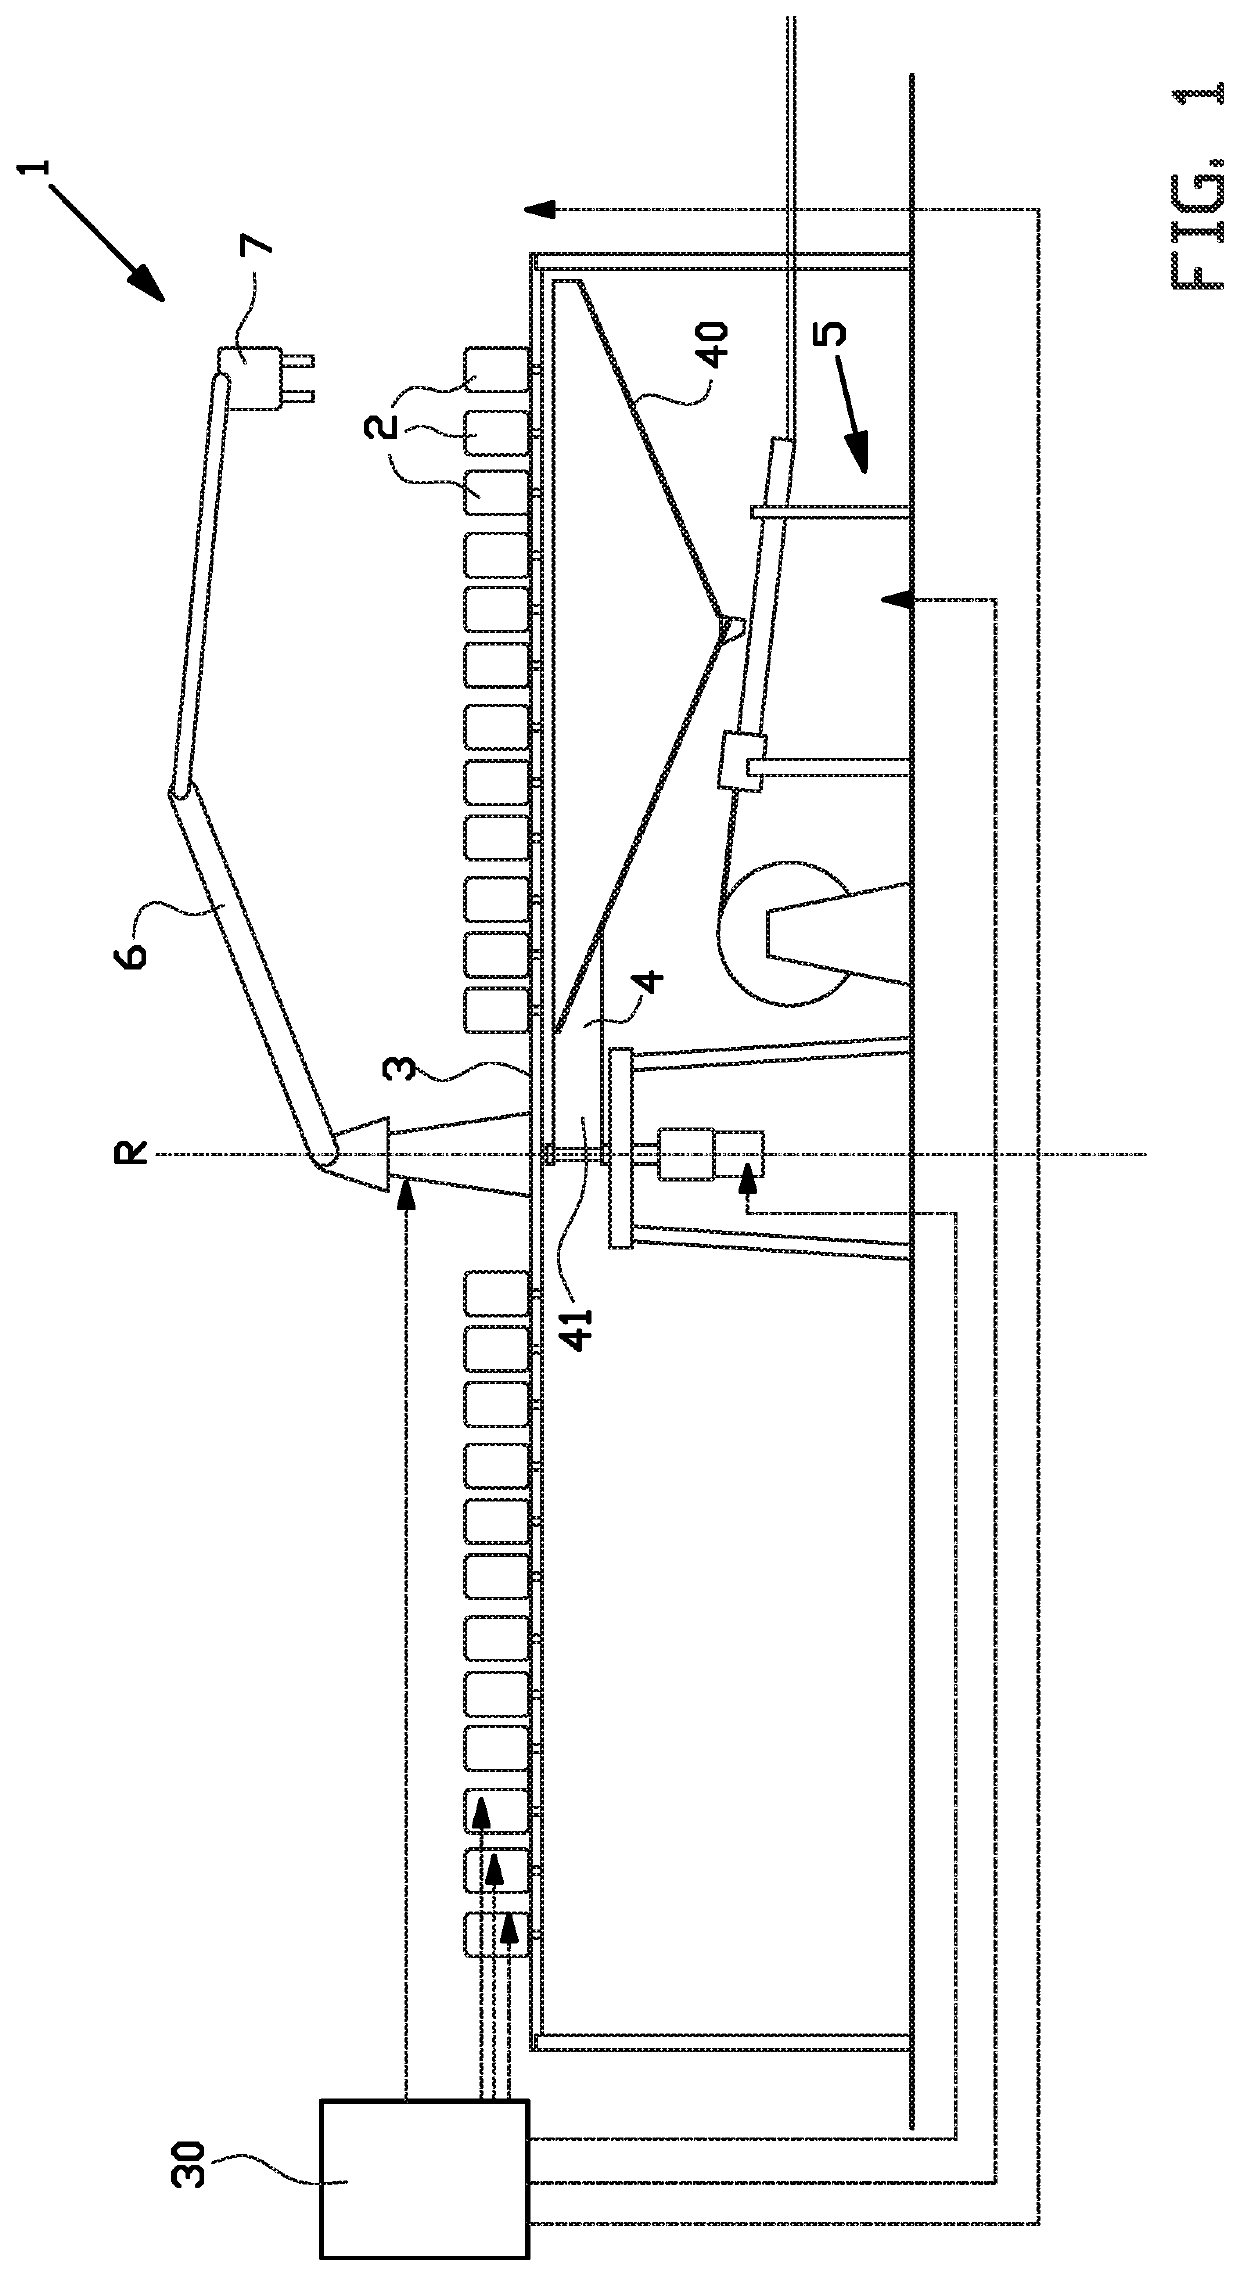 Method for dispensing discrete medicaments, a test station for testing a feeder unit, and a method for determining a fill level of a feeder unit